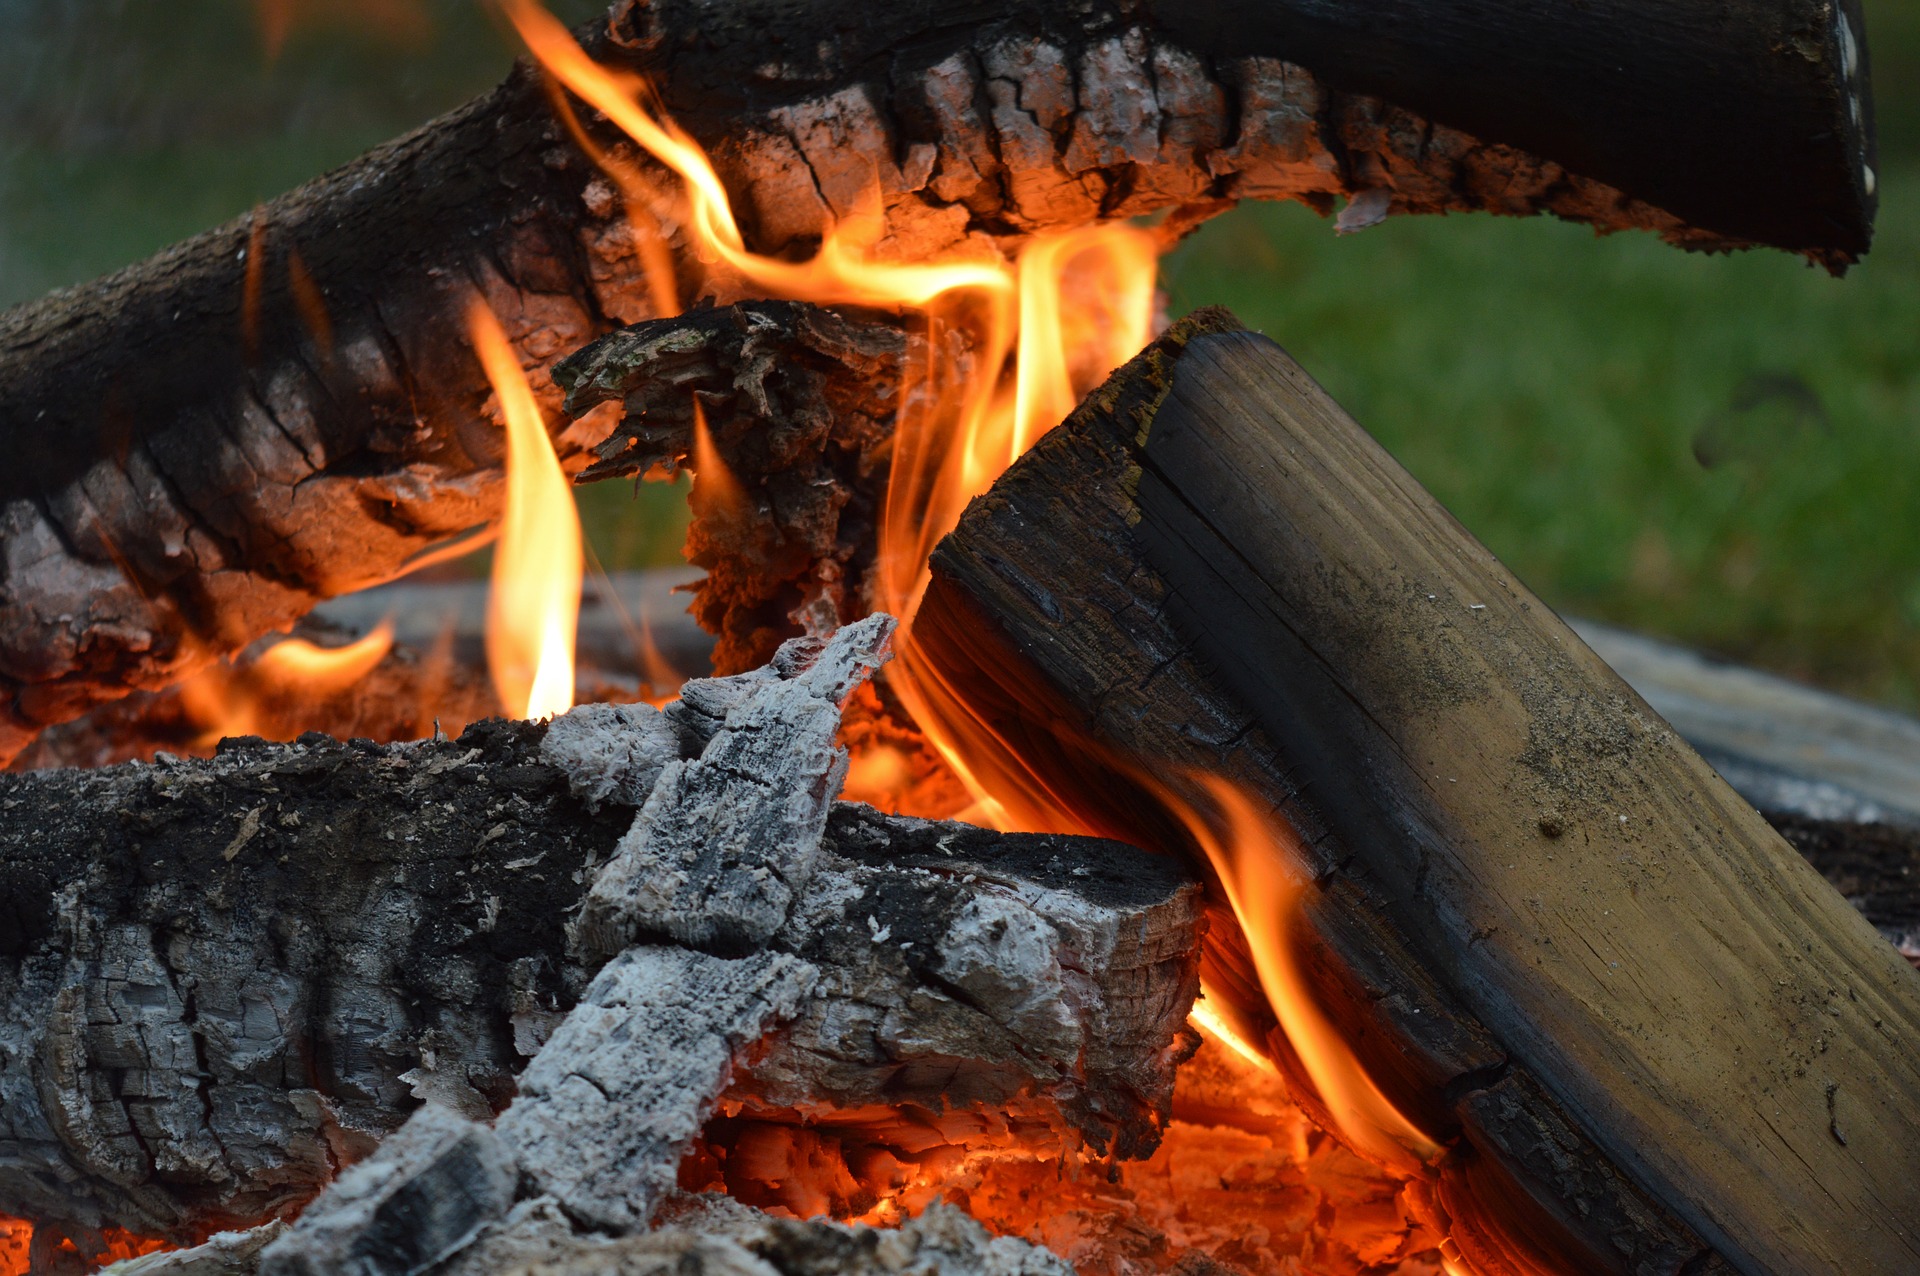 10 Questions to Ask Before Starting a FIRE This Summer - Before you install a fire pit in your backyard, make sure you know that you should ONLY use dried natural wood. - Thrift Diving